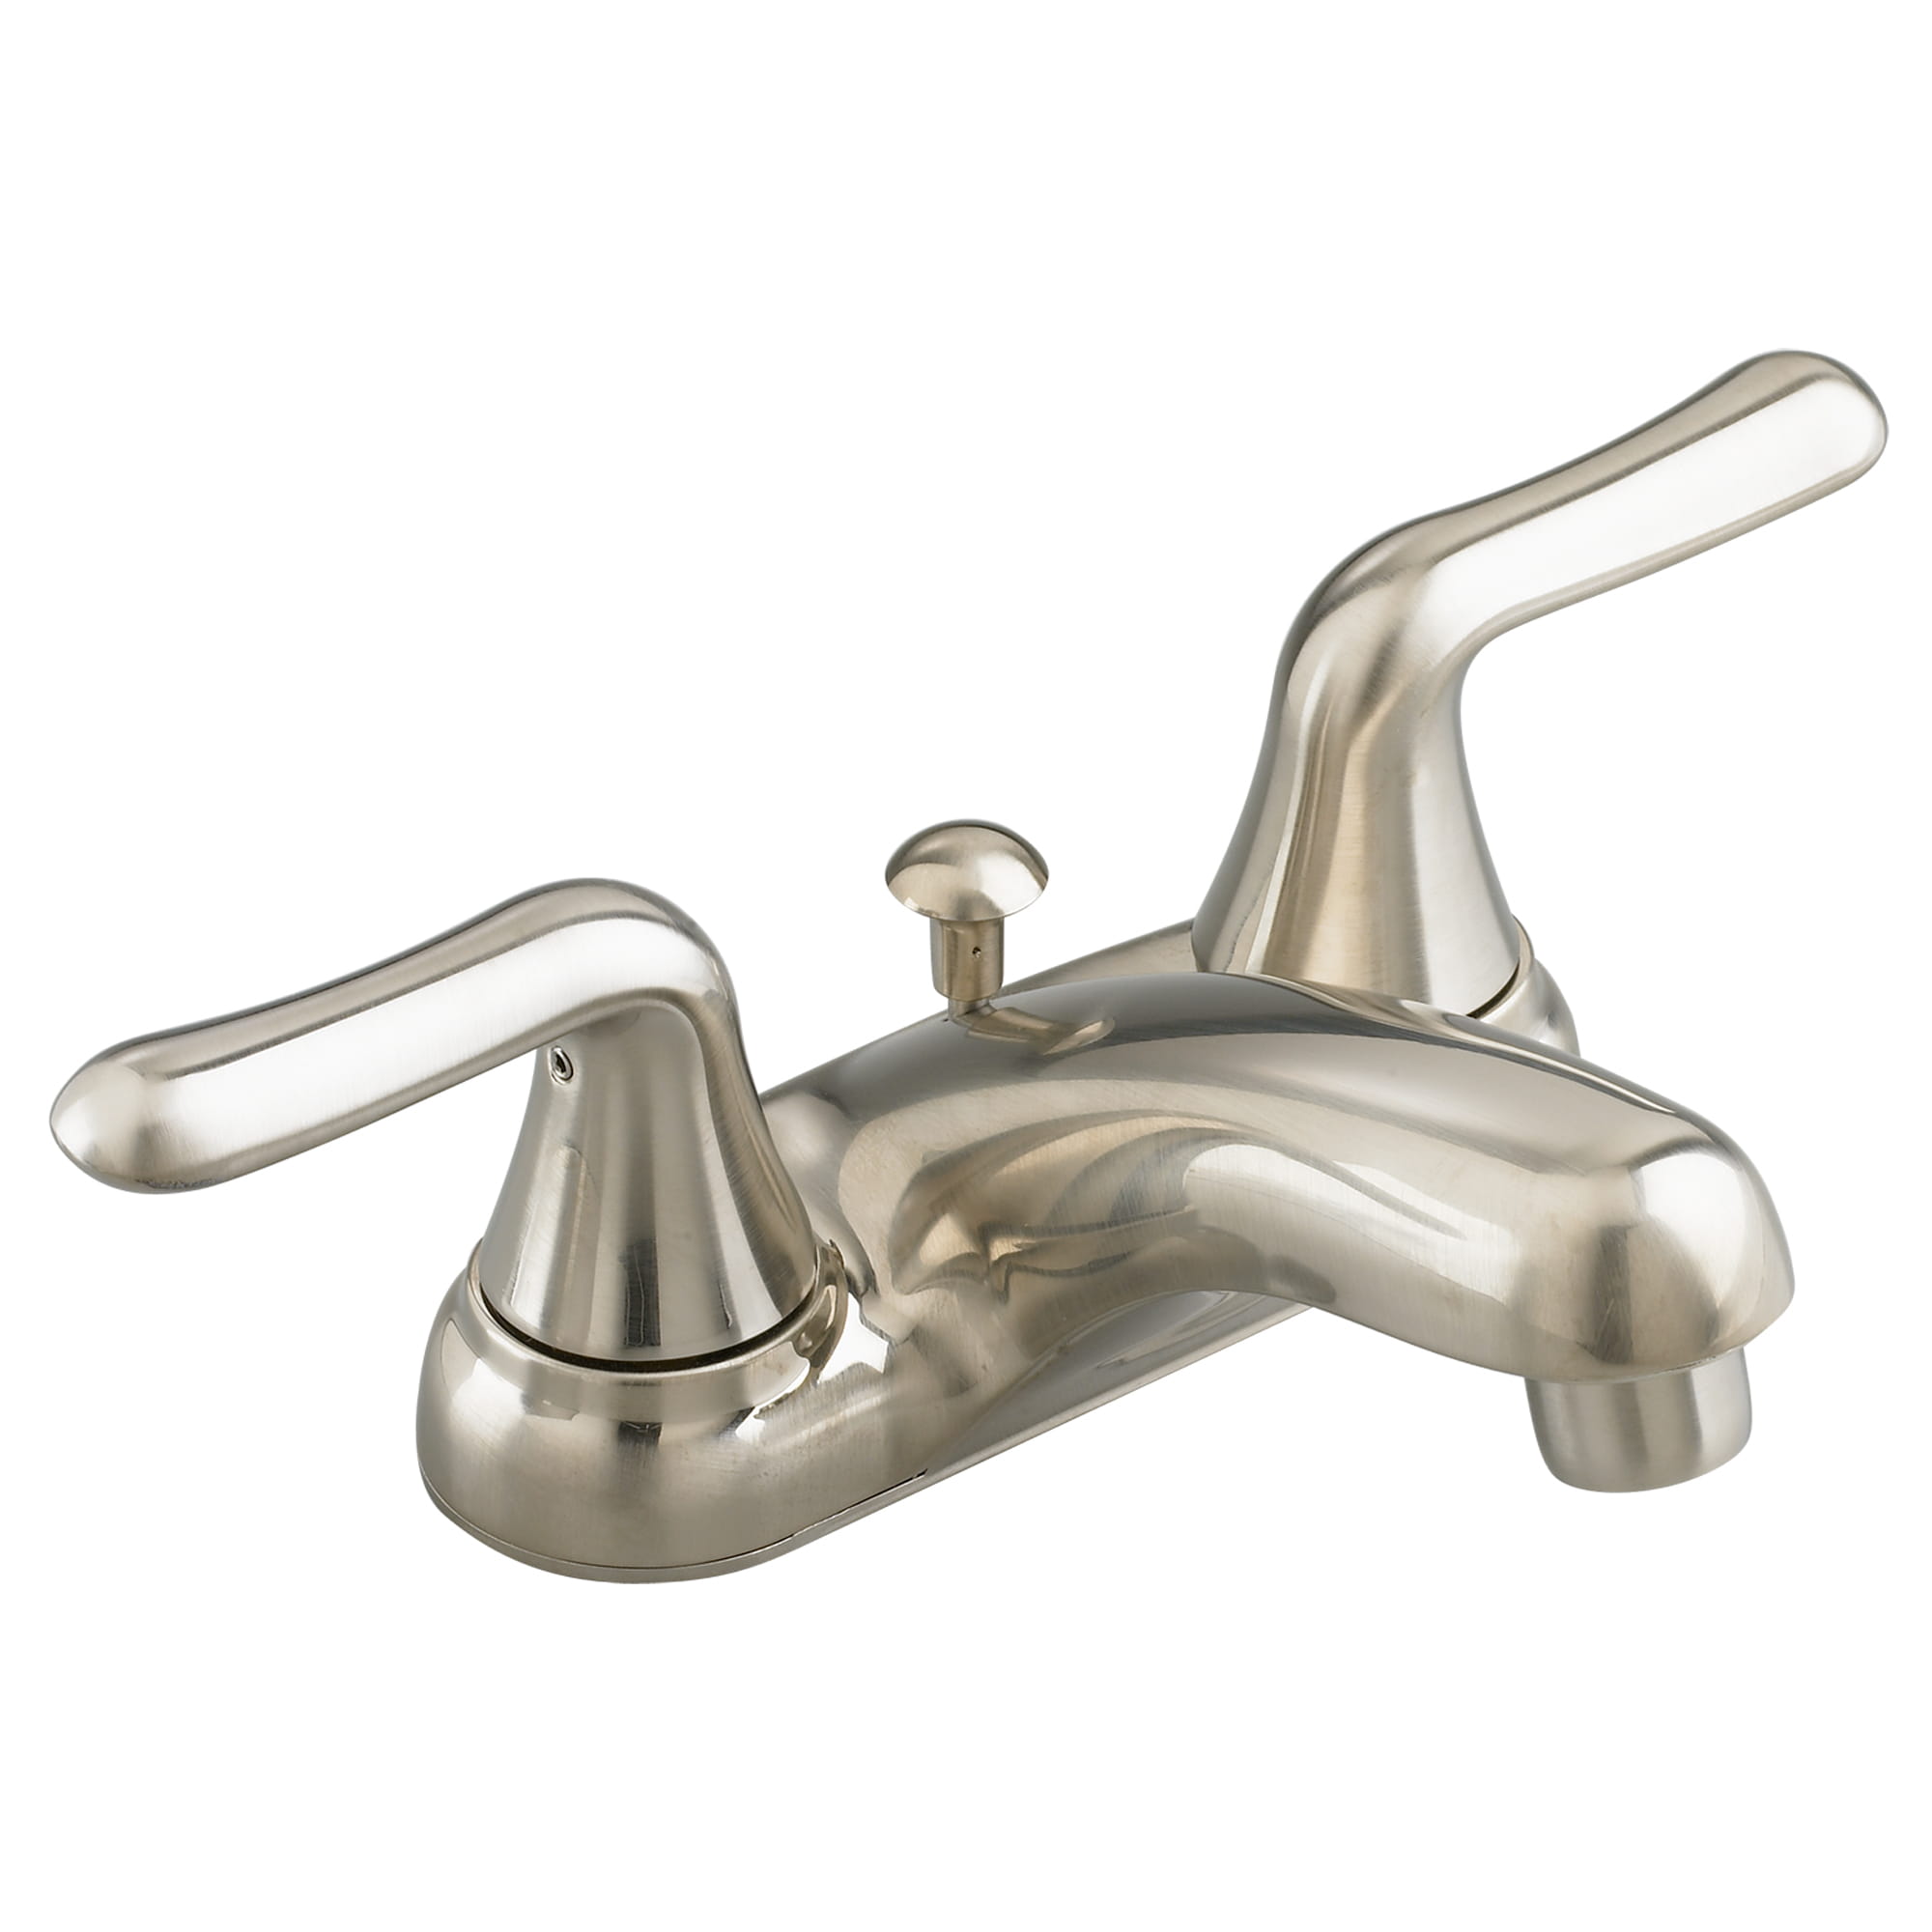 Colony Soft 4 Inch Centerset 2 Handle Bathroom Faucet 12 gpm 45 L min With Lever Handles   BRUSHED NICKEL